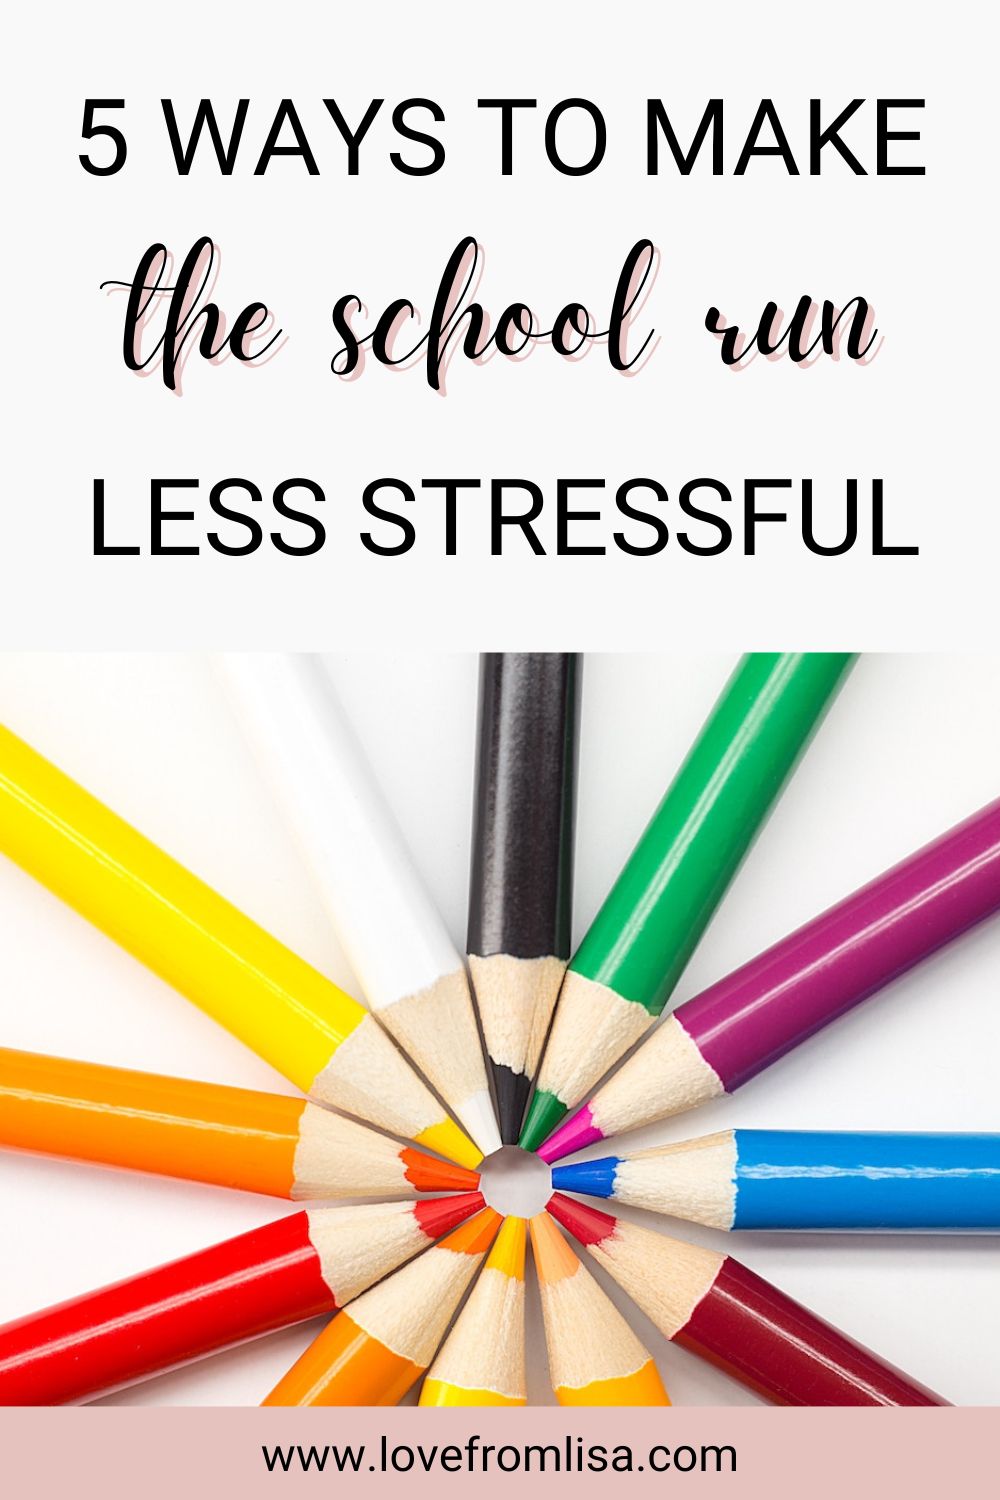 5 ways to make the school run less stressful Pinterest graphic